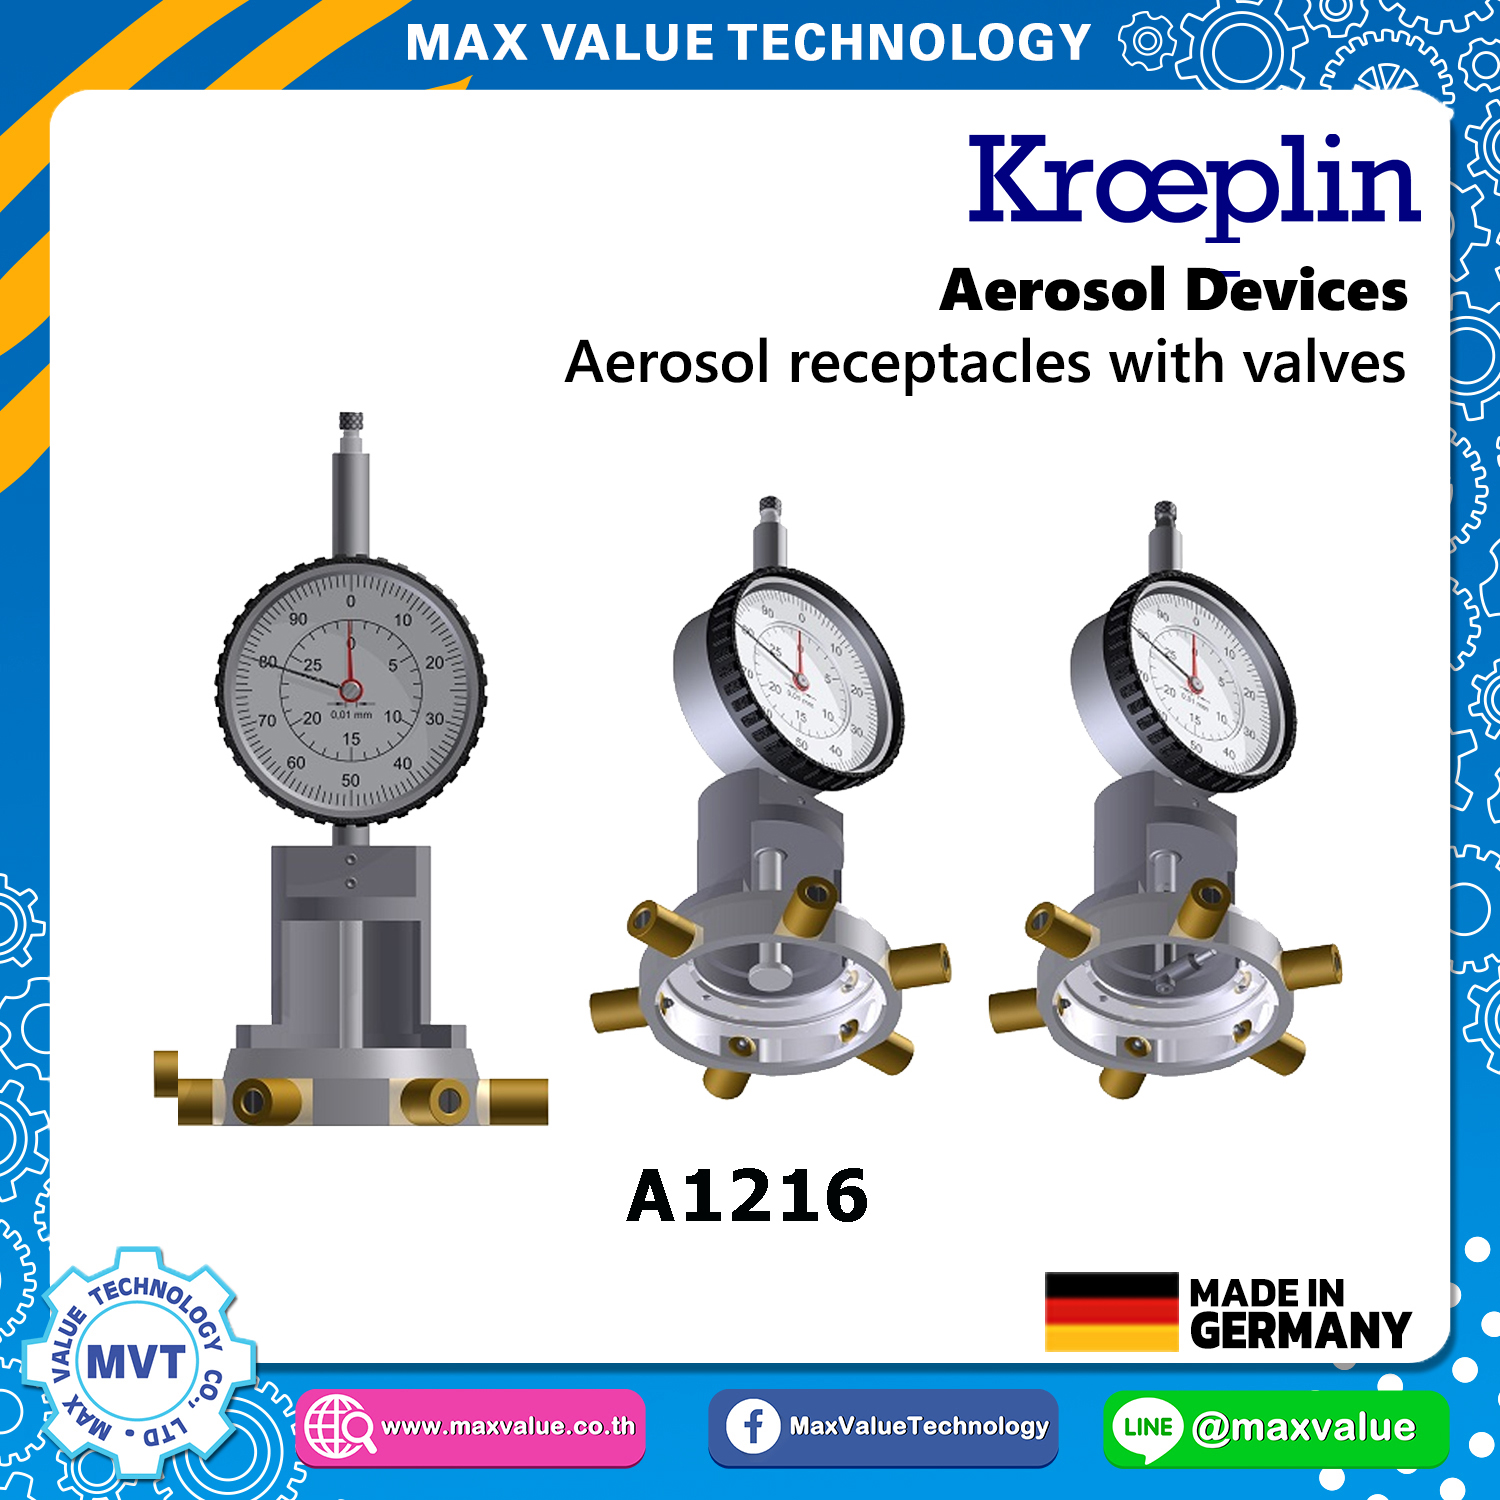 A1216/AE1216 - Aerosol devices - Aerosol receptacles with valves